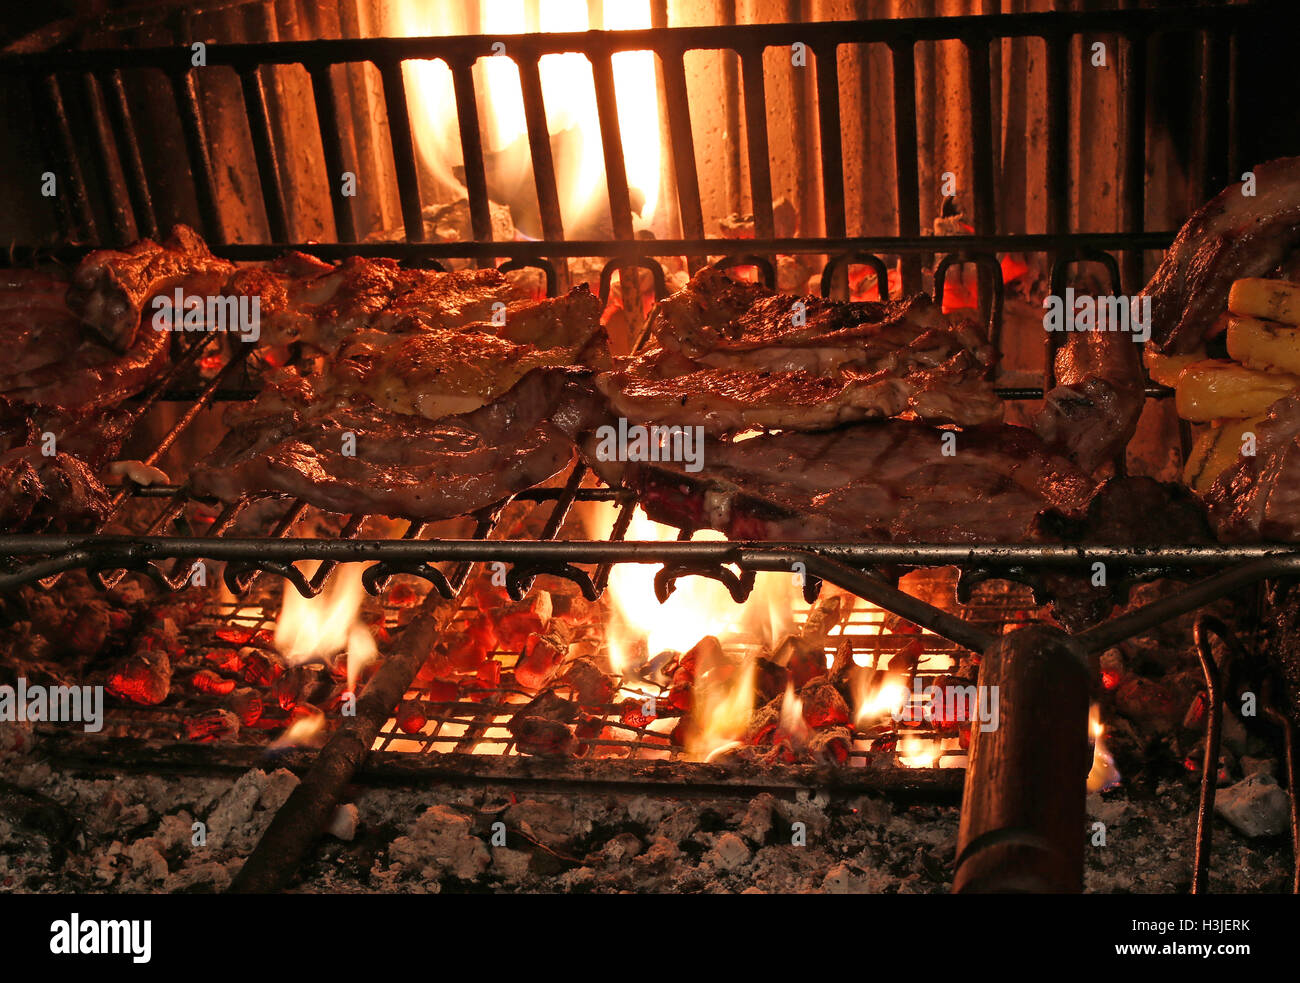 cooking the meat on the grill in the big fireplace in the restaurant Stock Photo